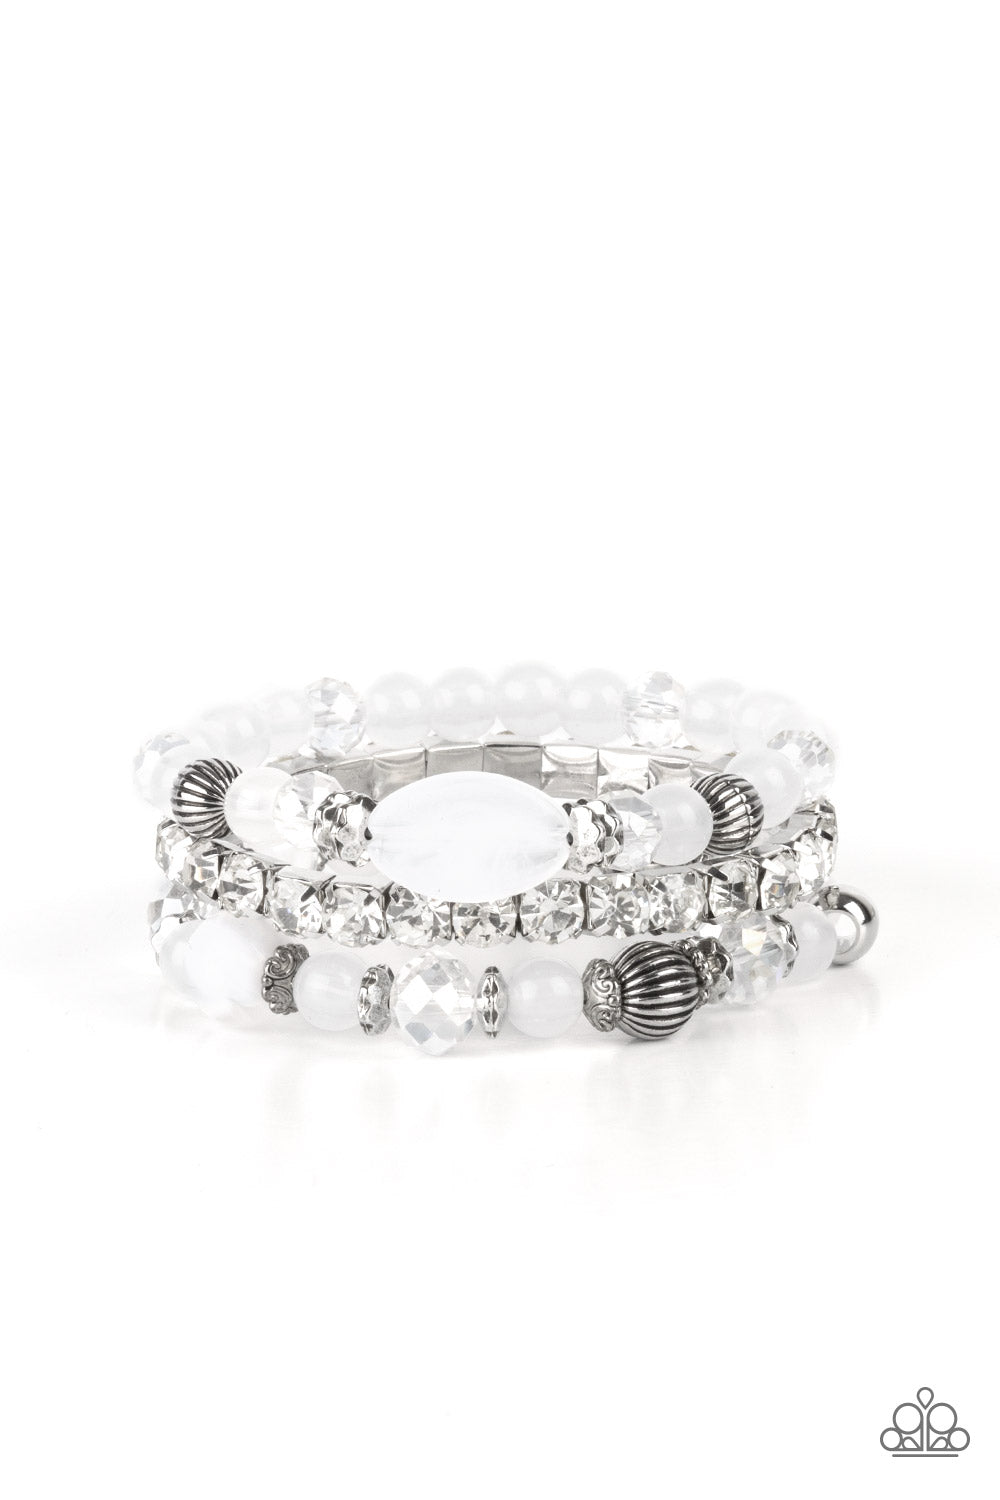 Paparazzi Ethereal Etiquette - White Bracelet - A Finishing Touch Jewelry